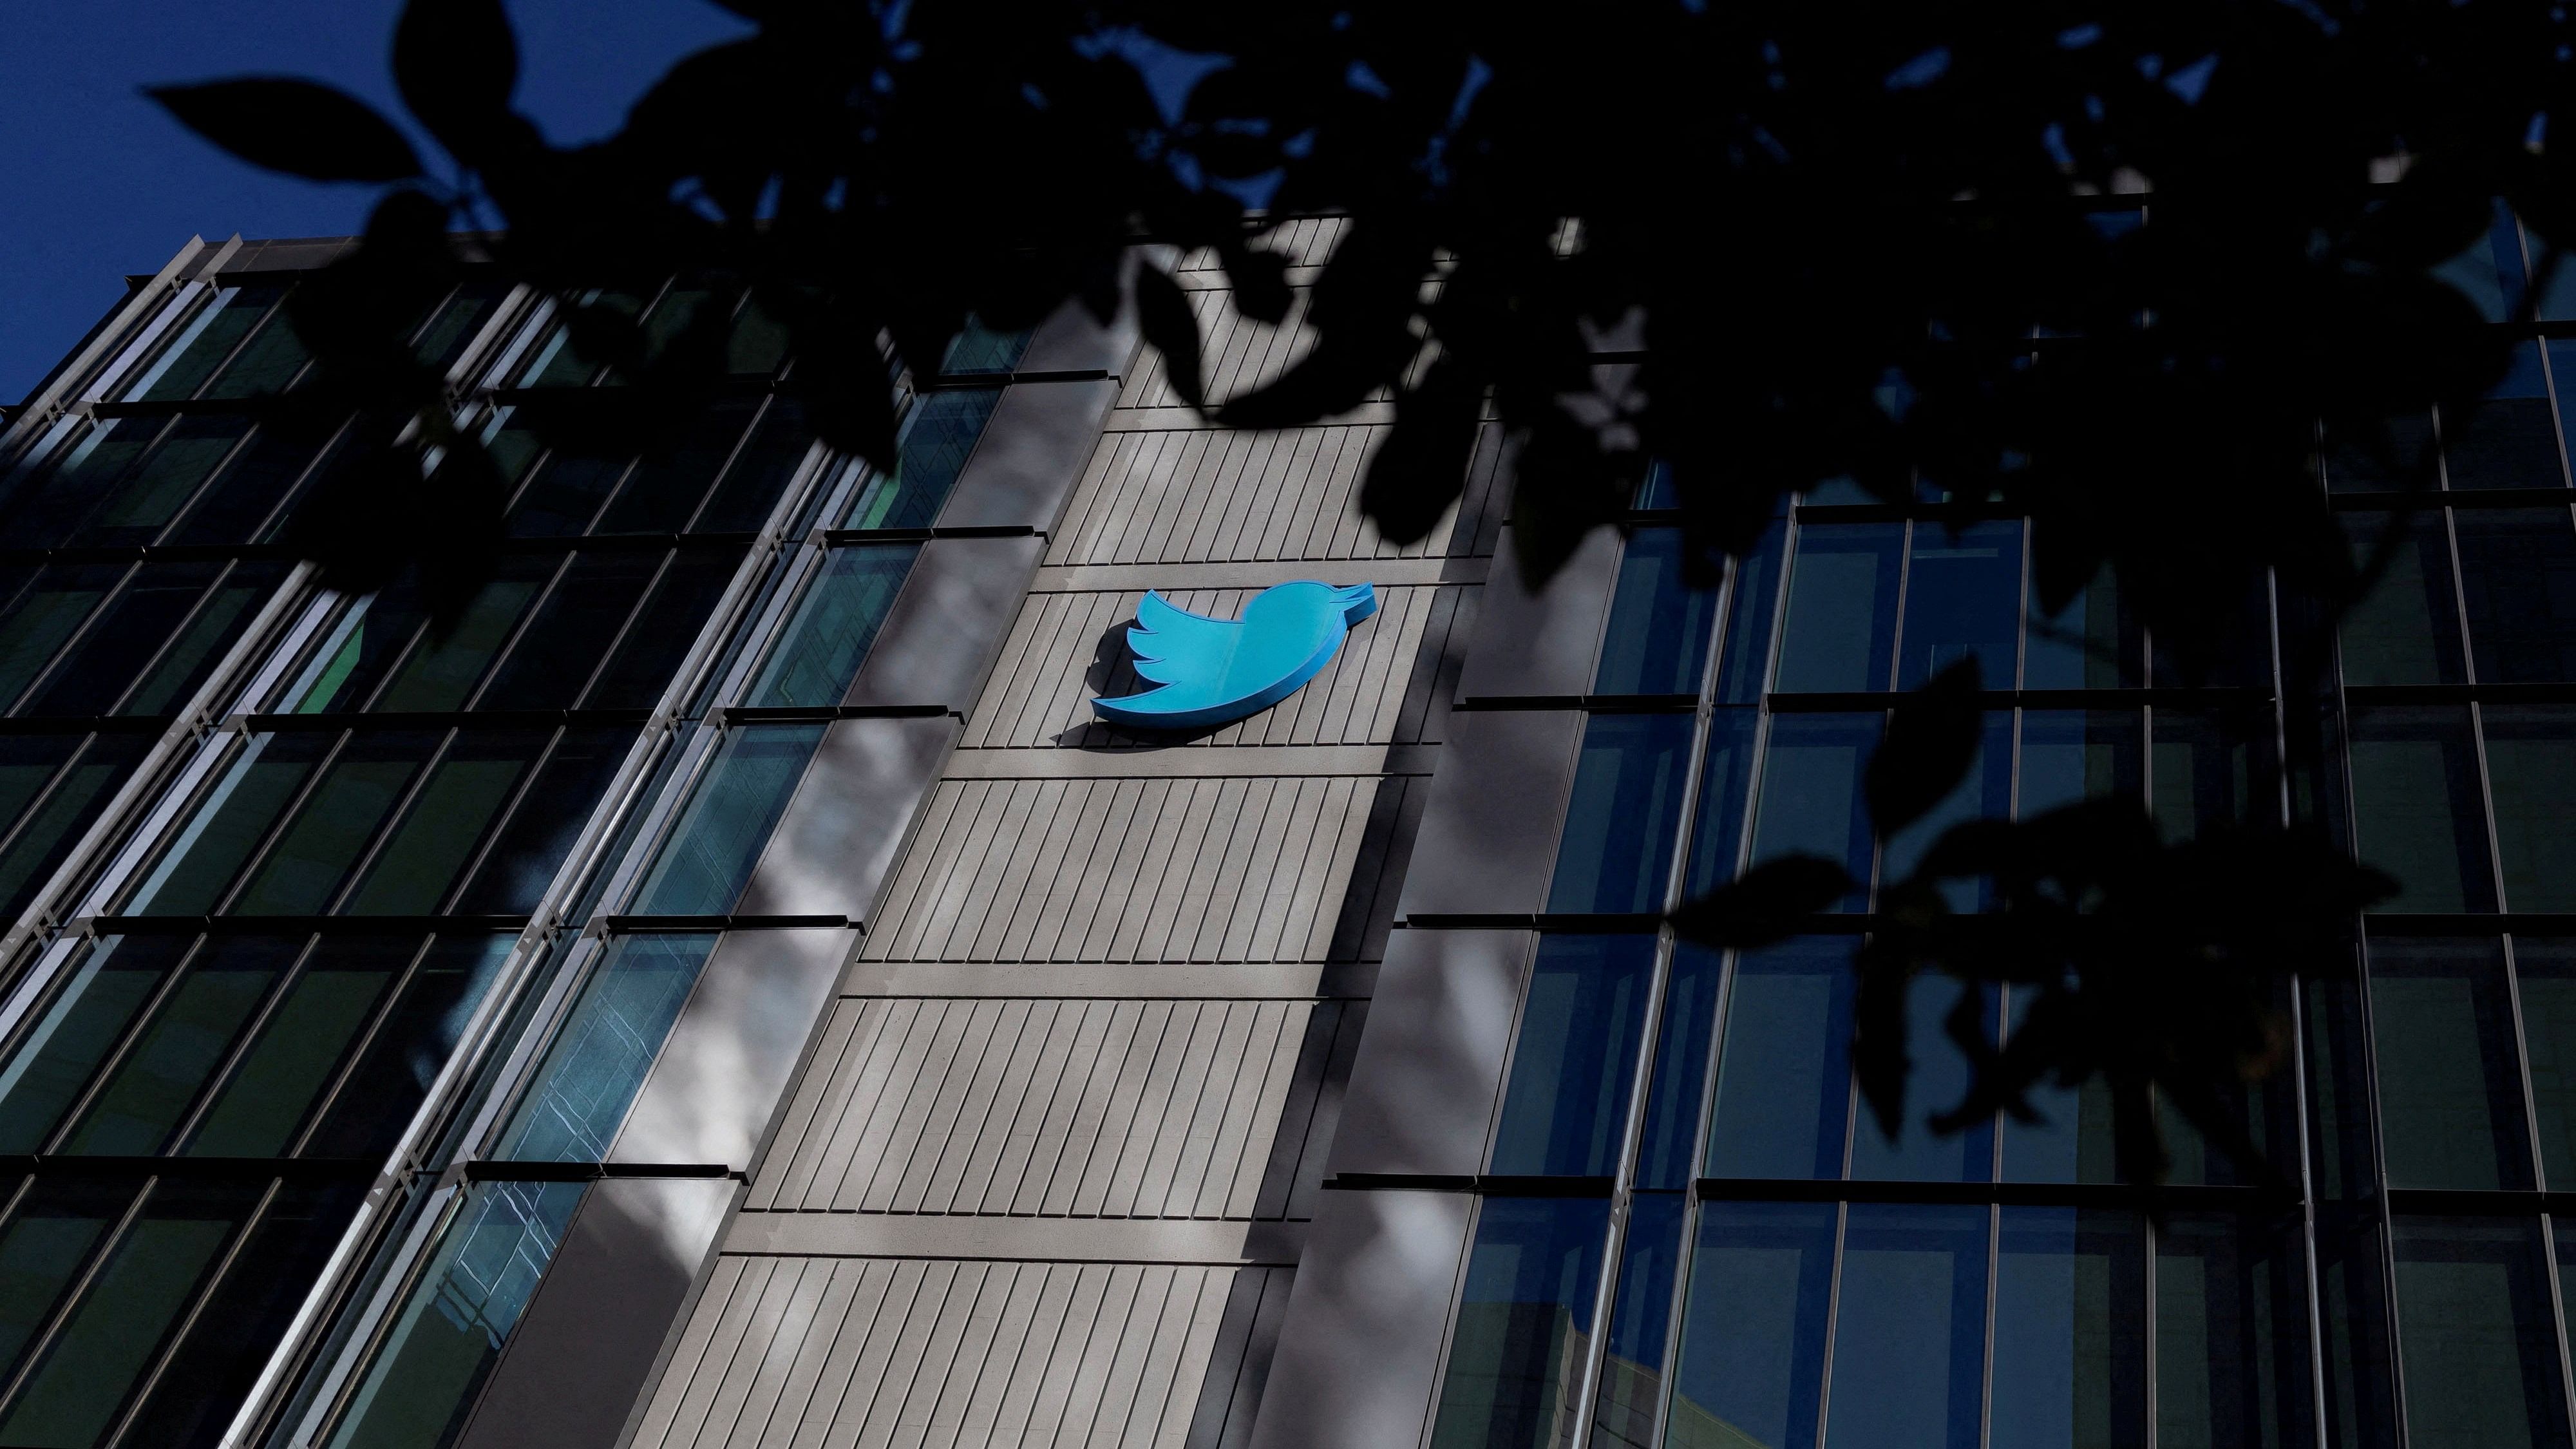 A view of the Twitter logo at its corporate headquarters in San Francisco, California. Credit: Retuers/File Photo